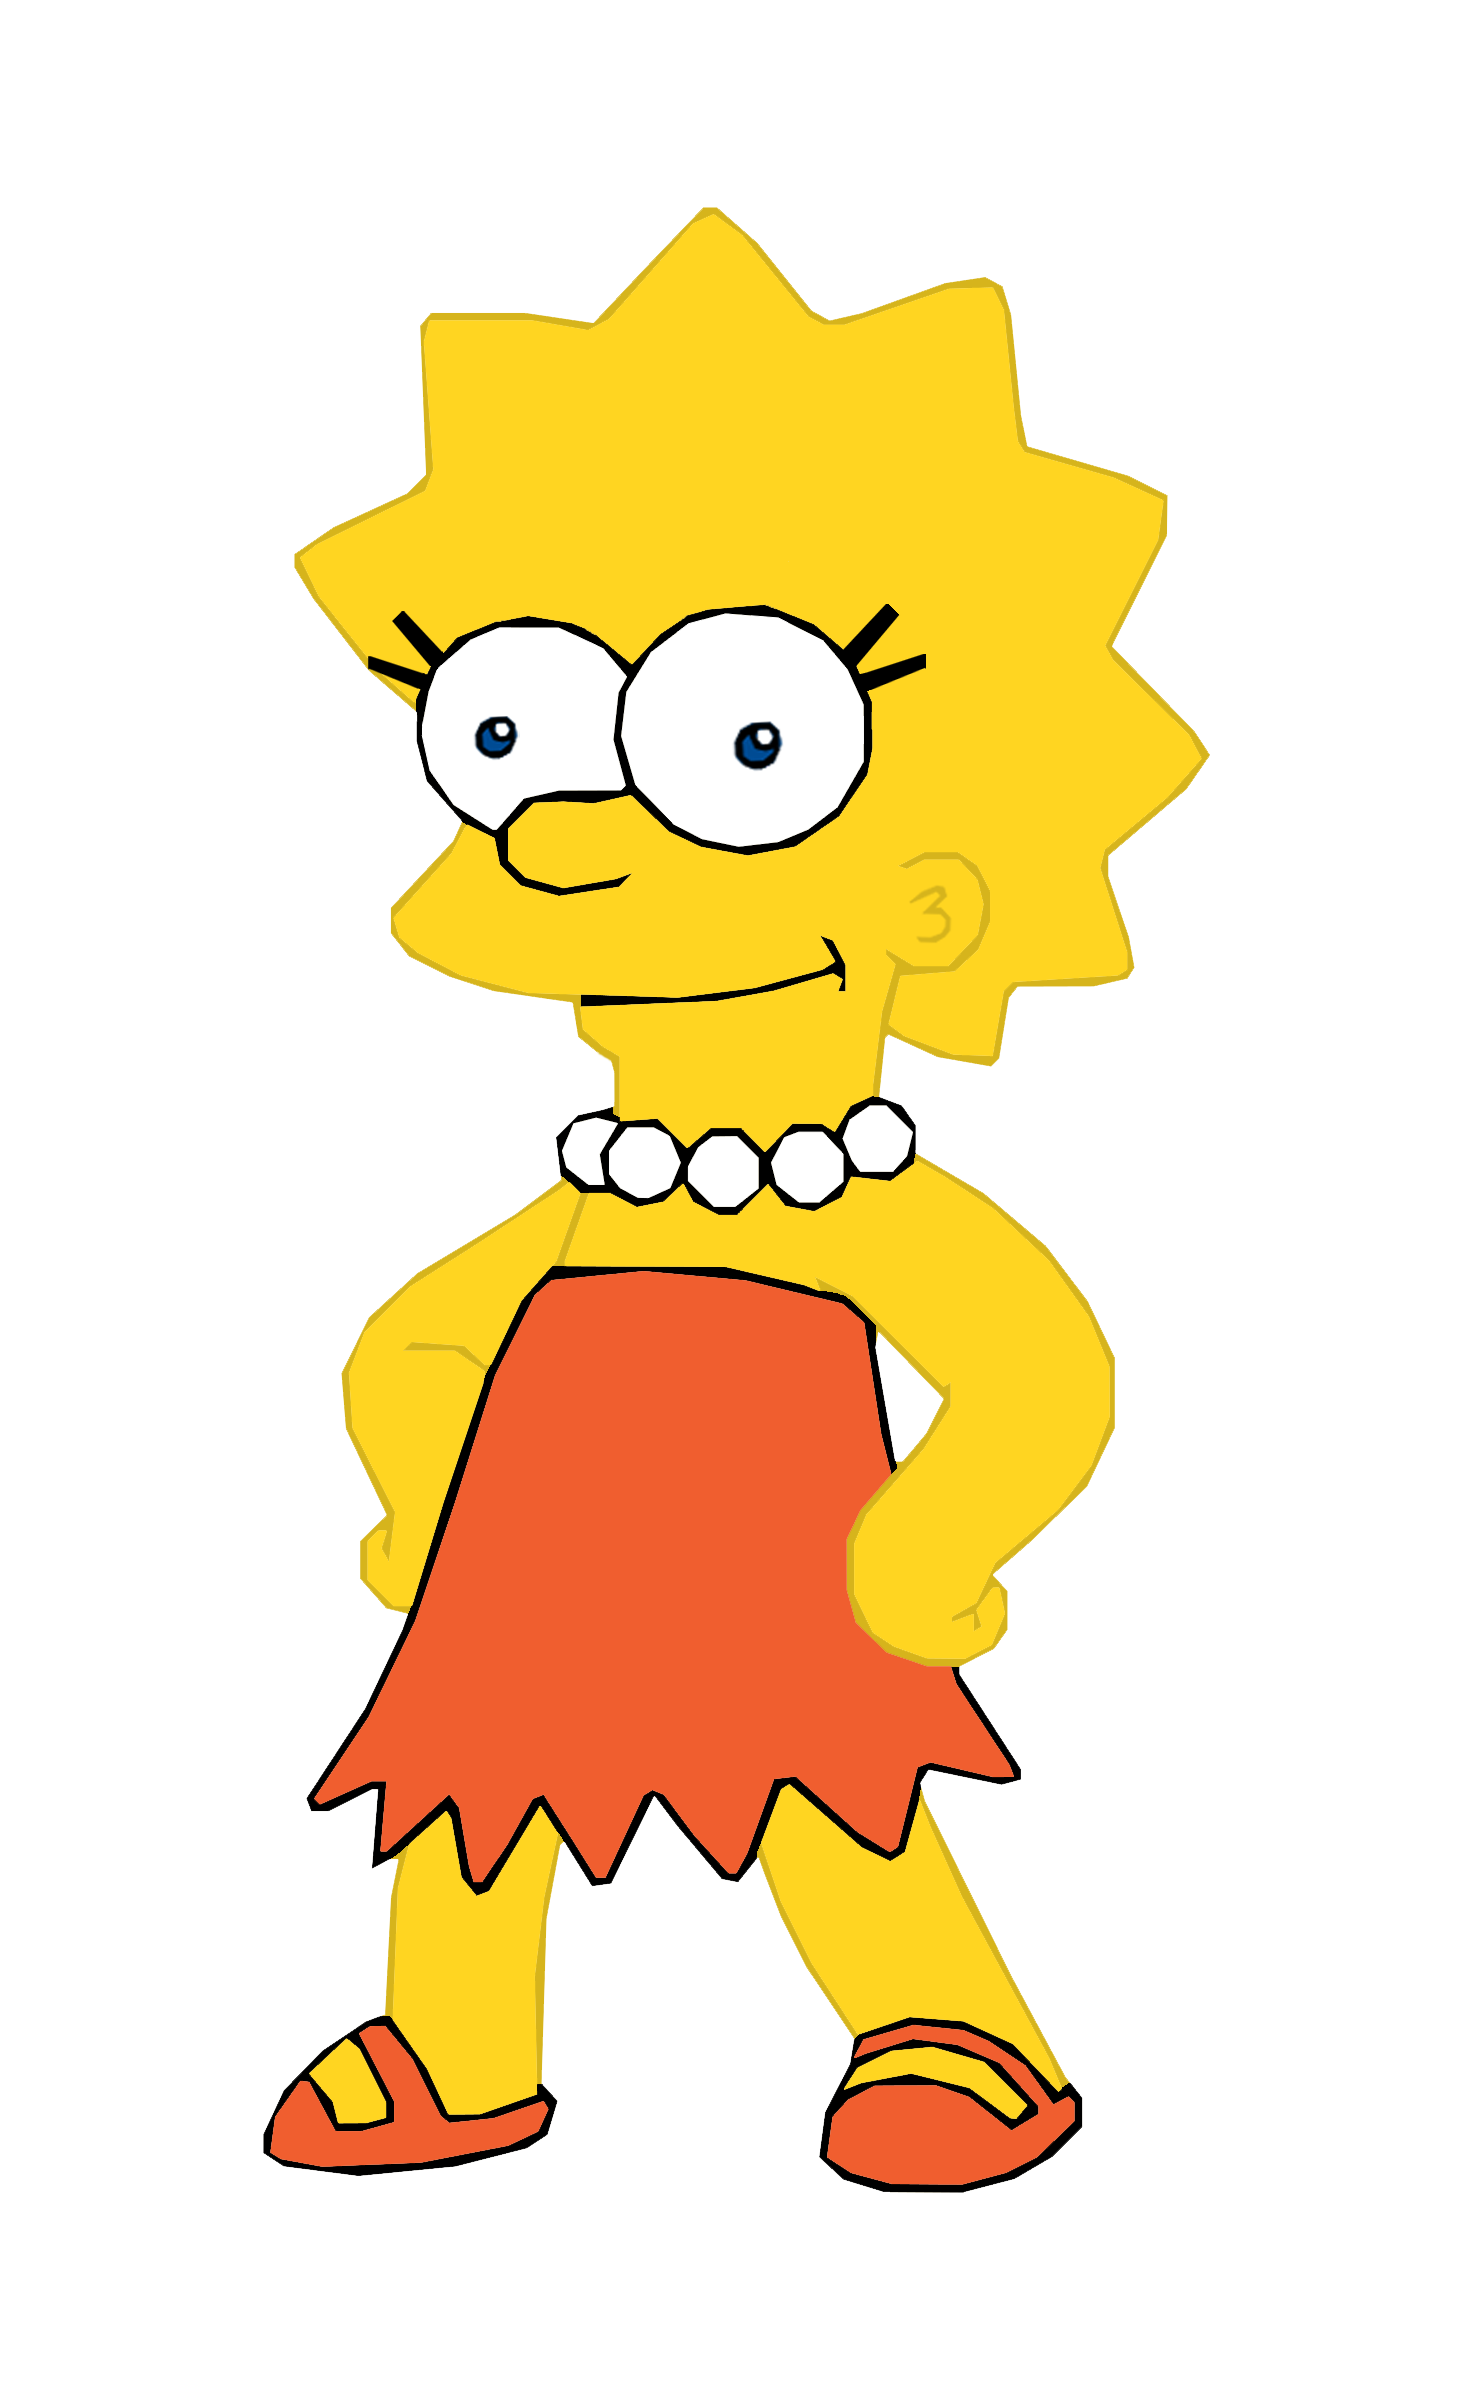 Lisa Simpson in PnF/Milo Murphy's Law style by Arthony70100 on DeviantArt